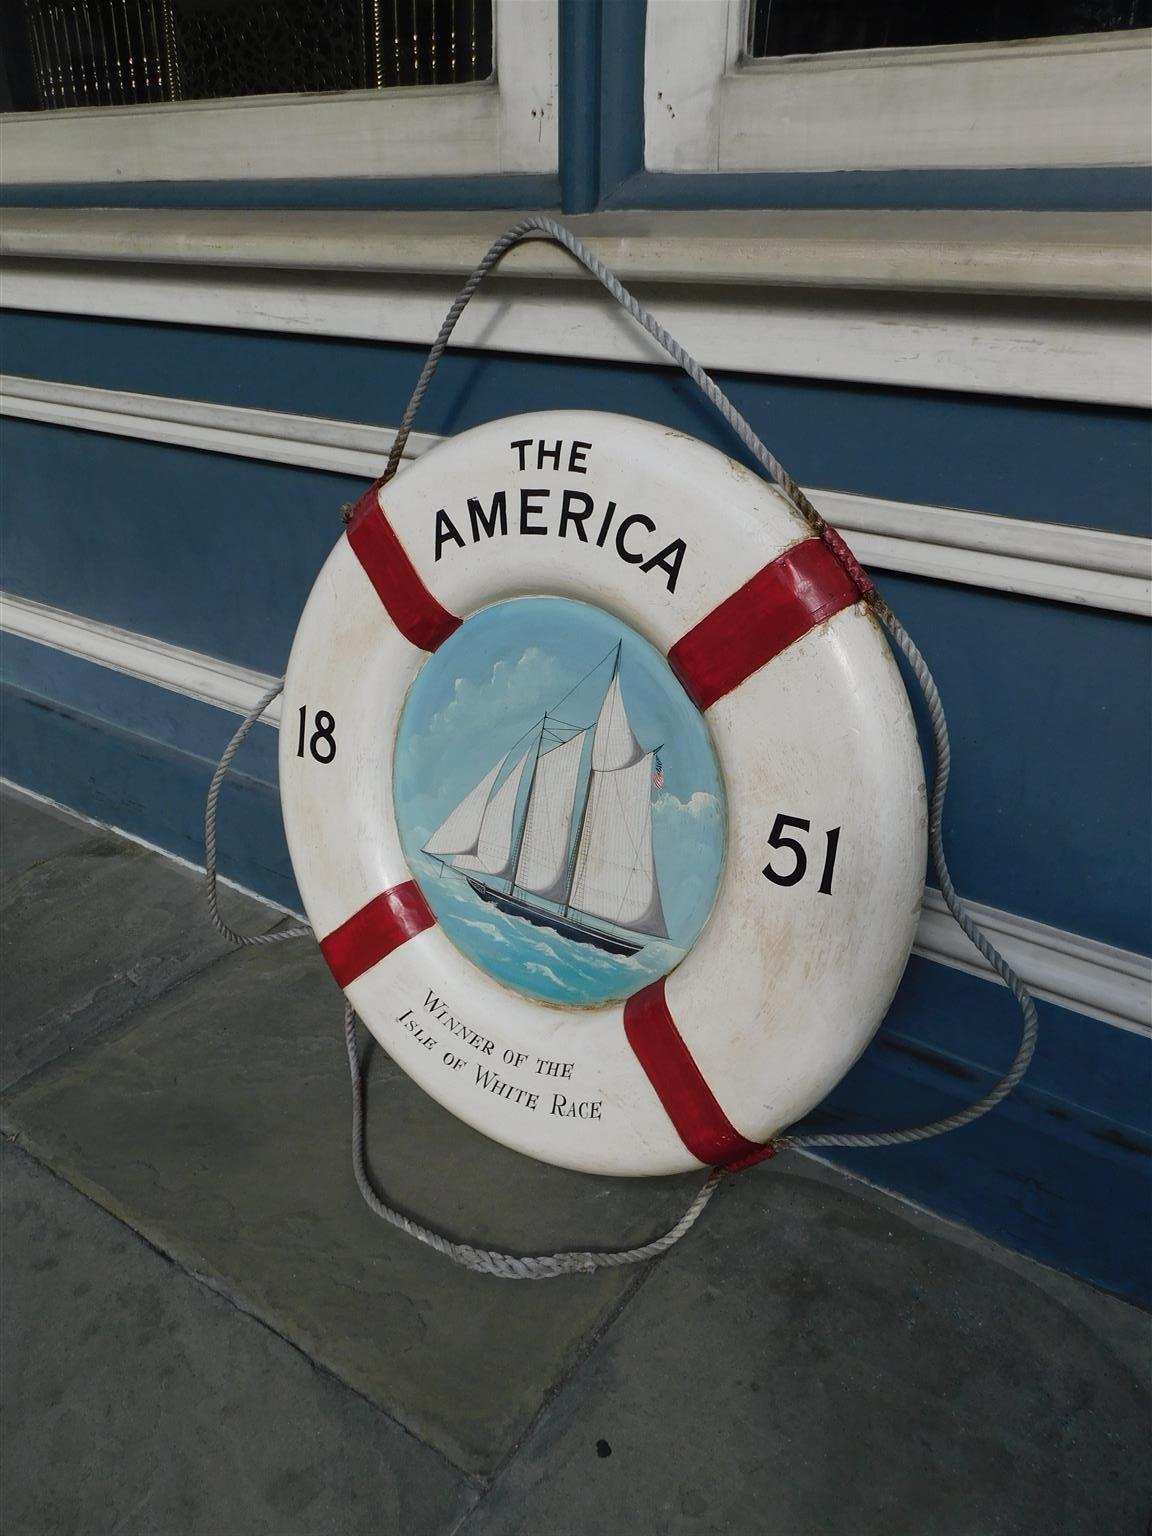 American Empire American Nautical Painted Life Ring with Sailing Vessel Isle of White Race, 1851